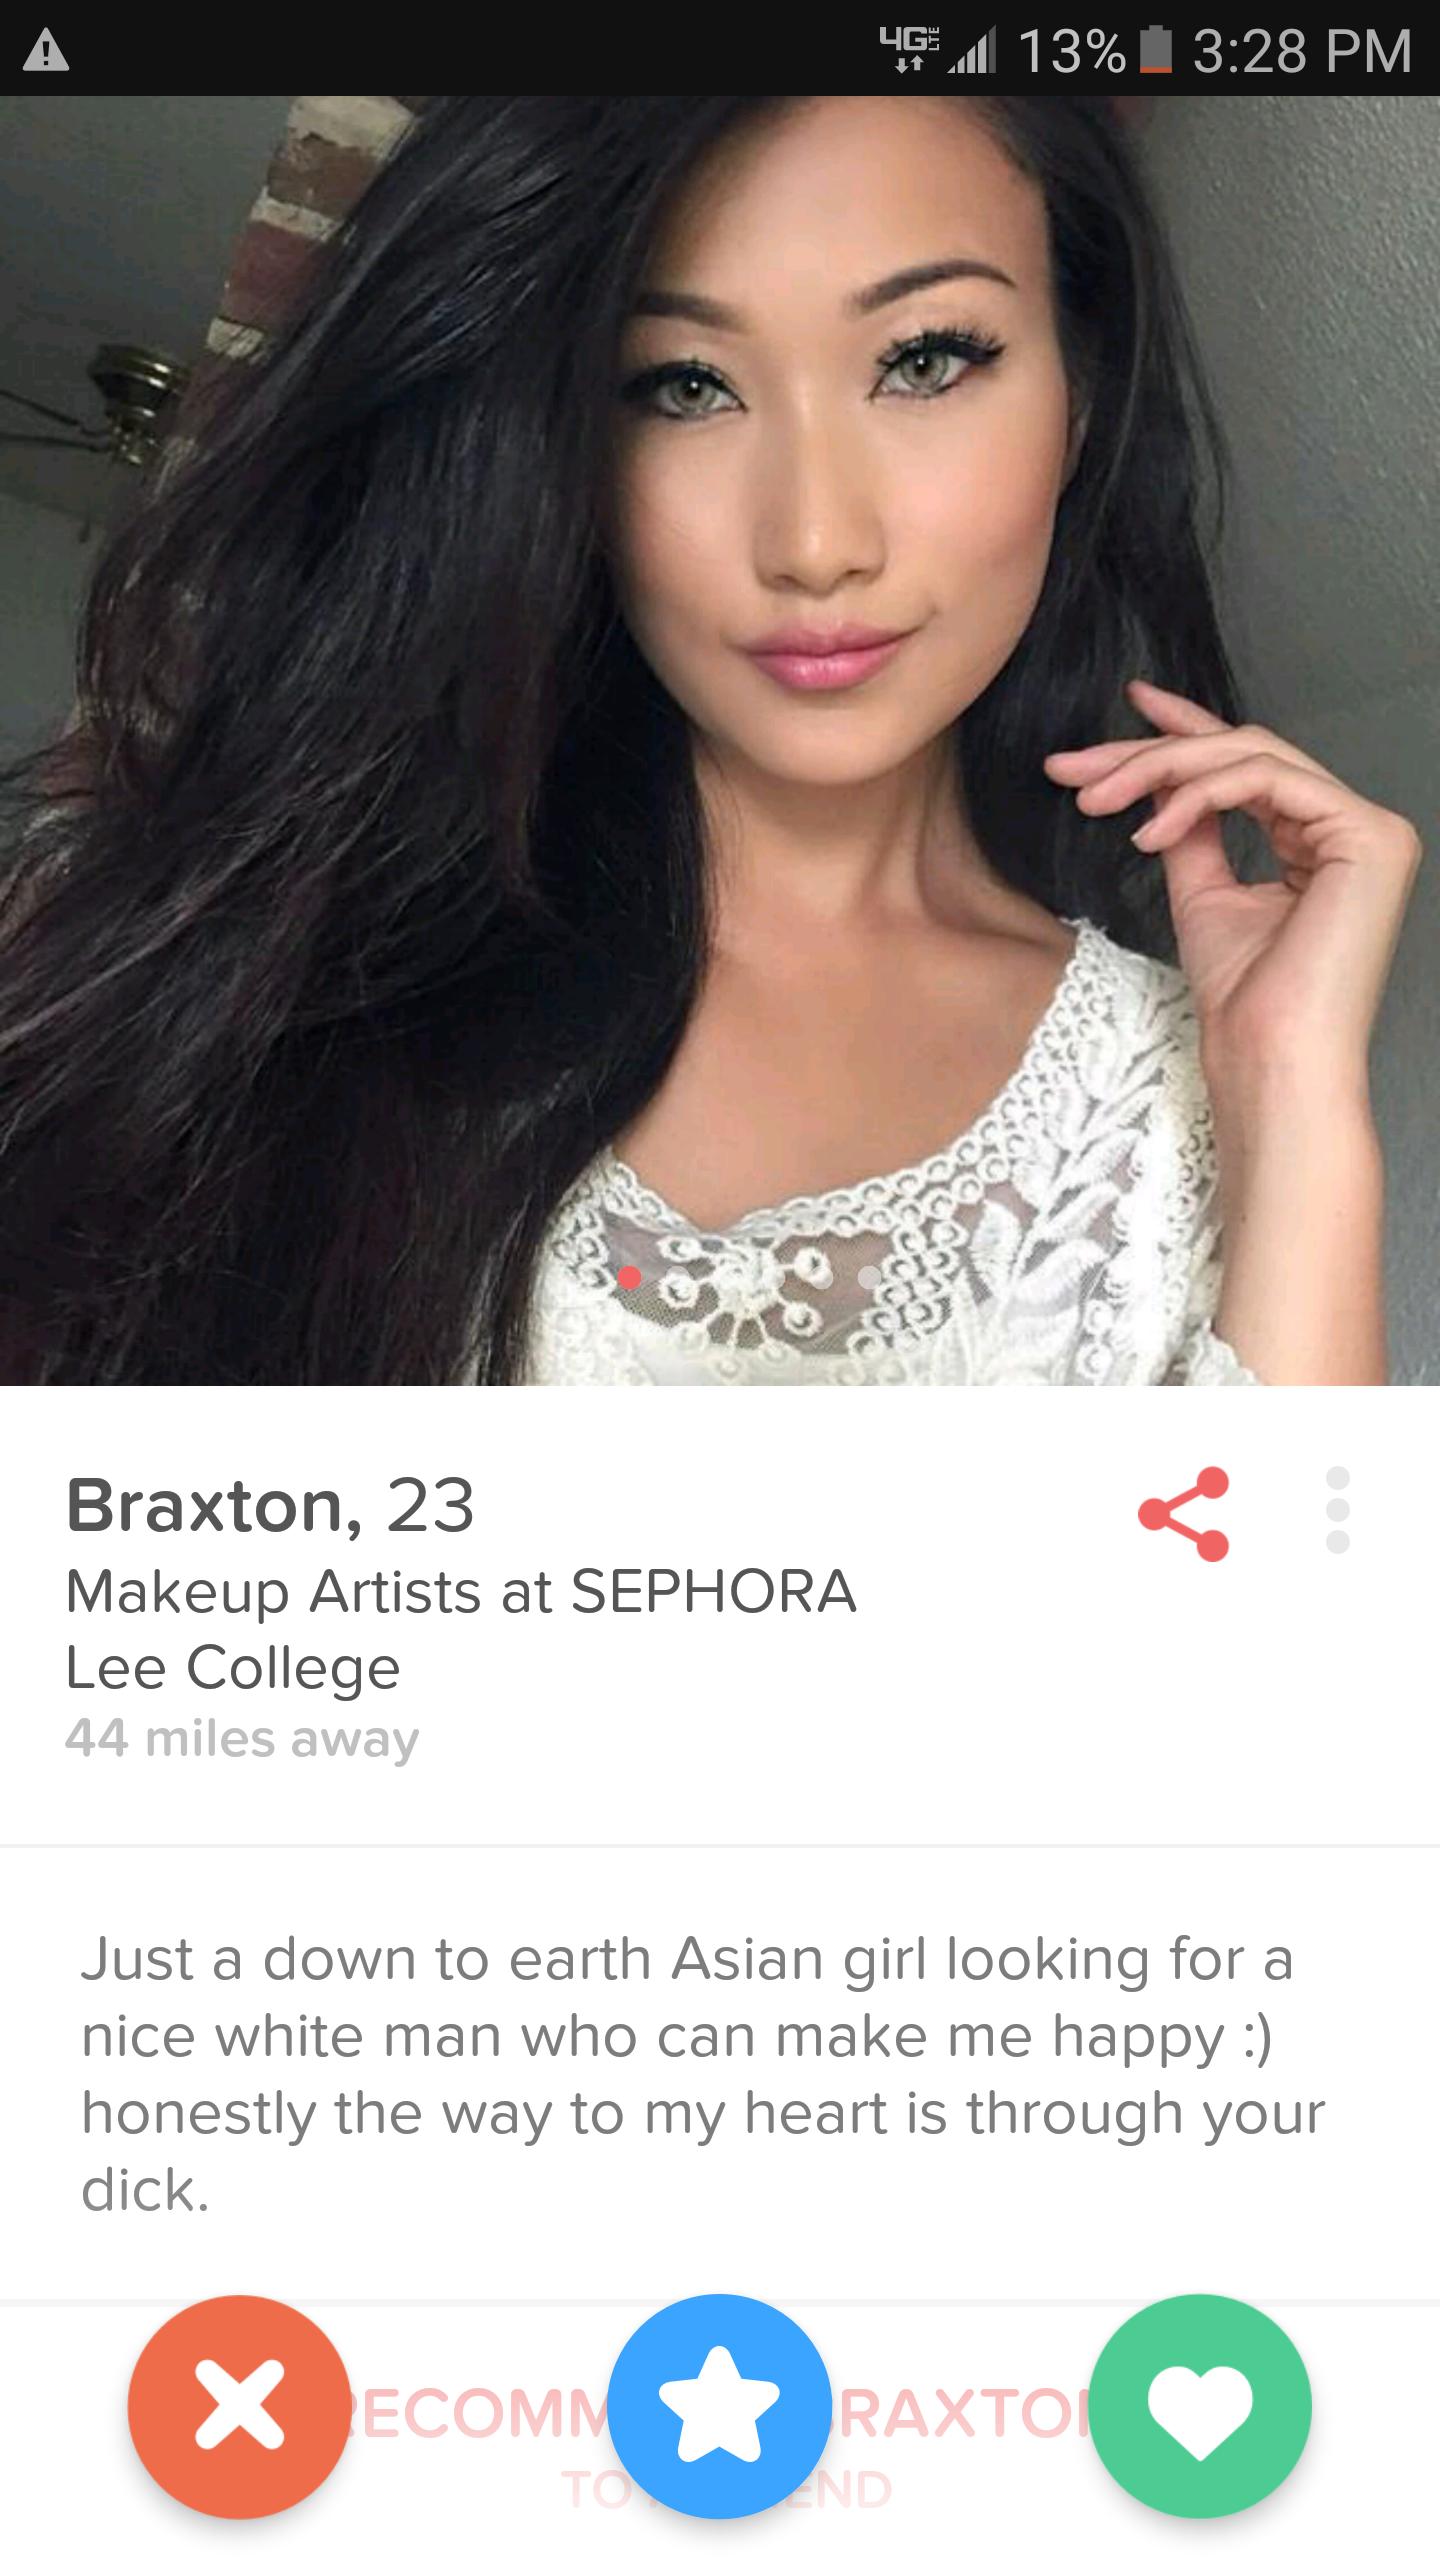 The Best Worst Profiles Conversations In The Tinder Universe